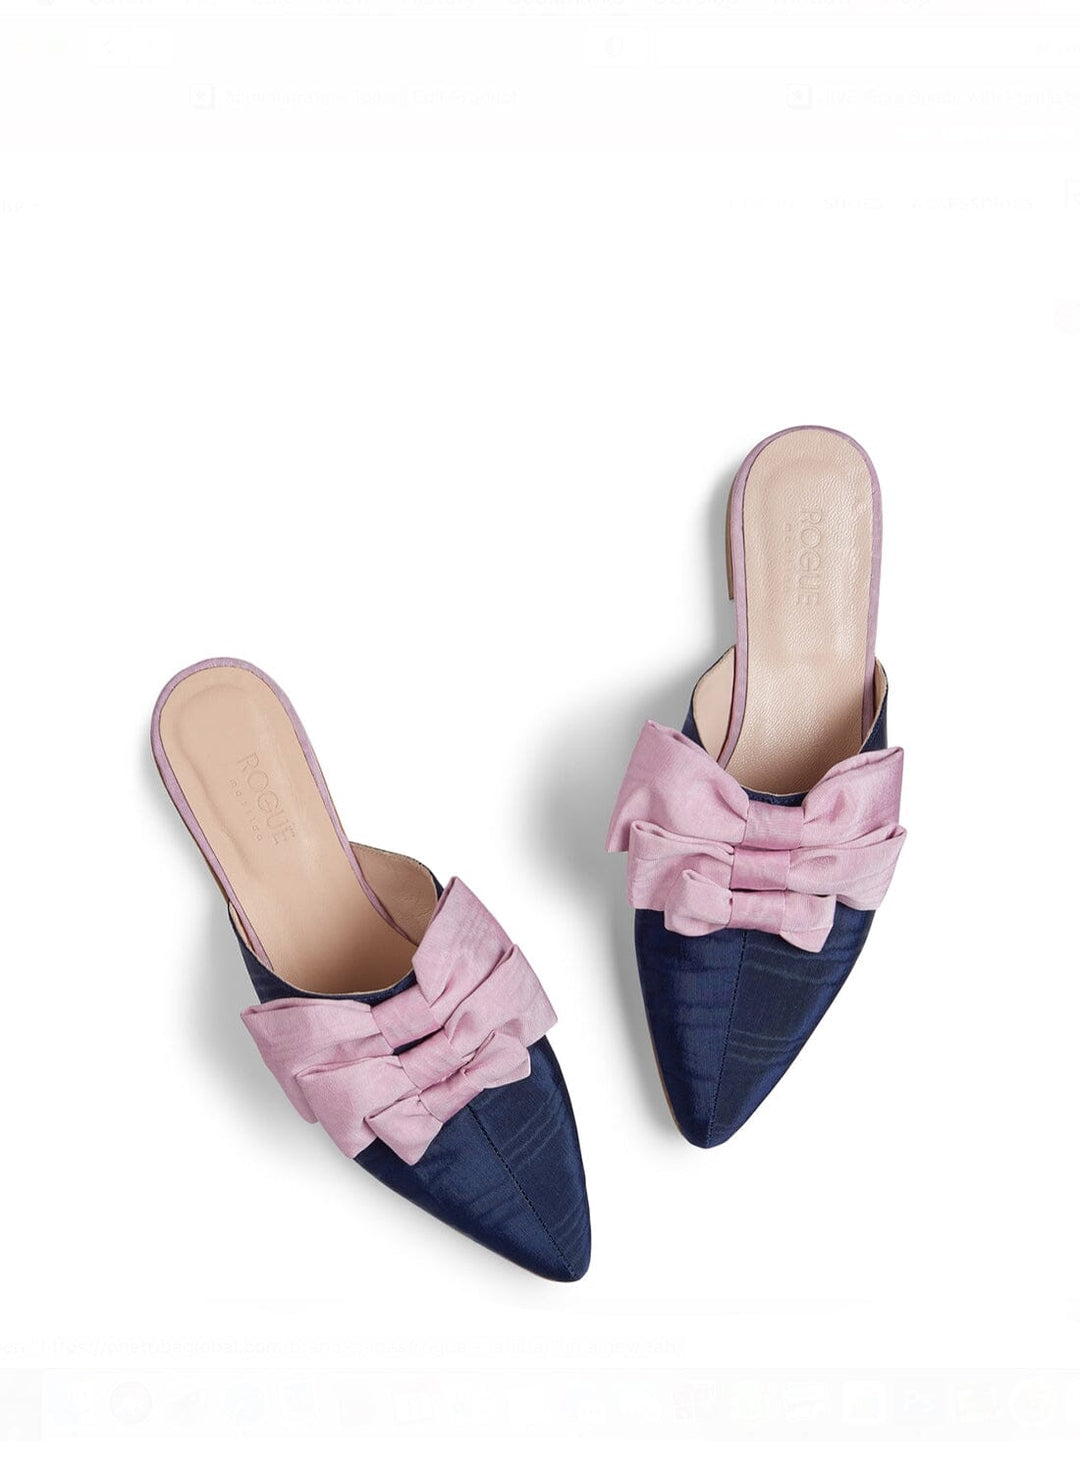 Tootsie in Navy Silk with Lilac Satin Shoes YBDFinds 